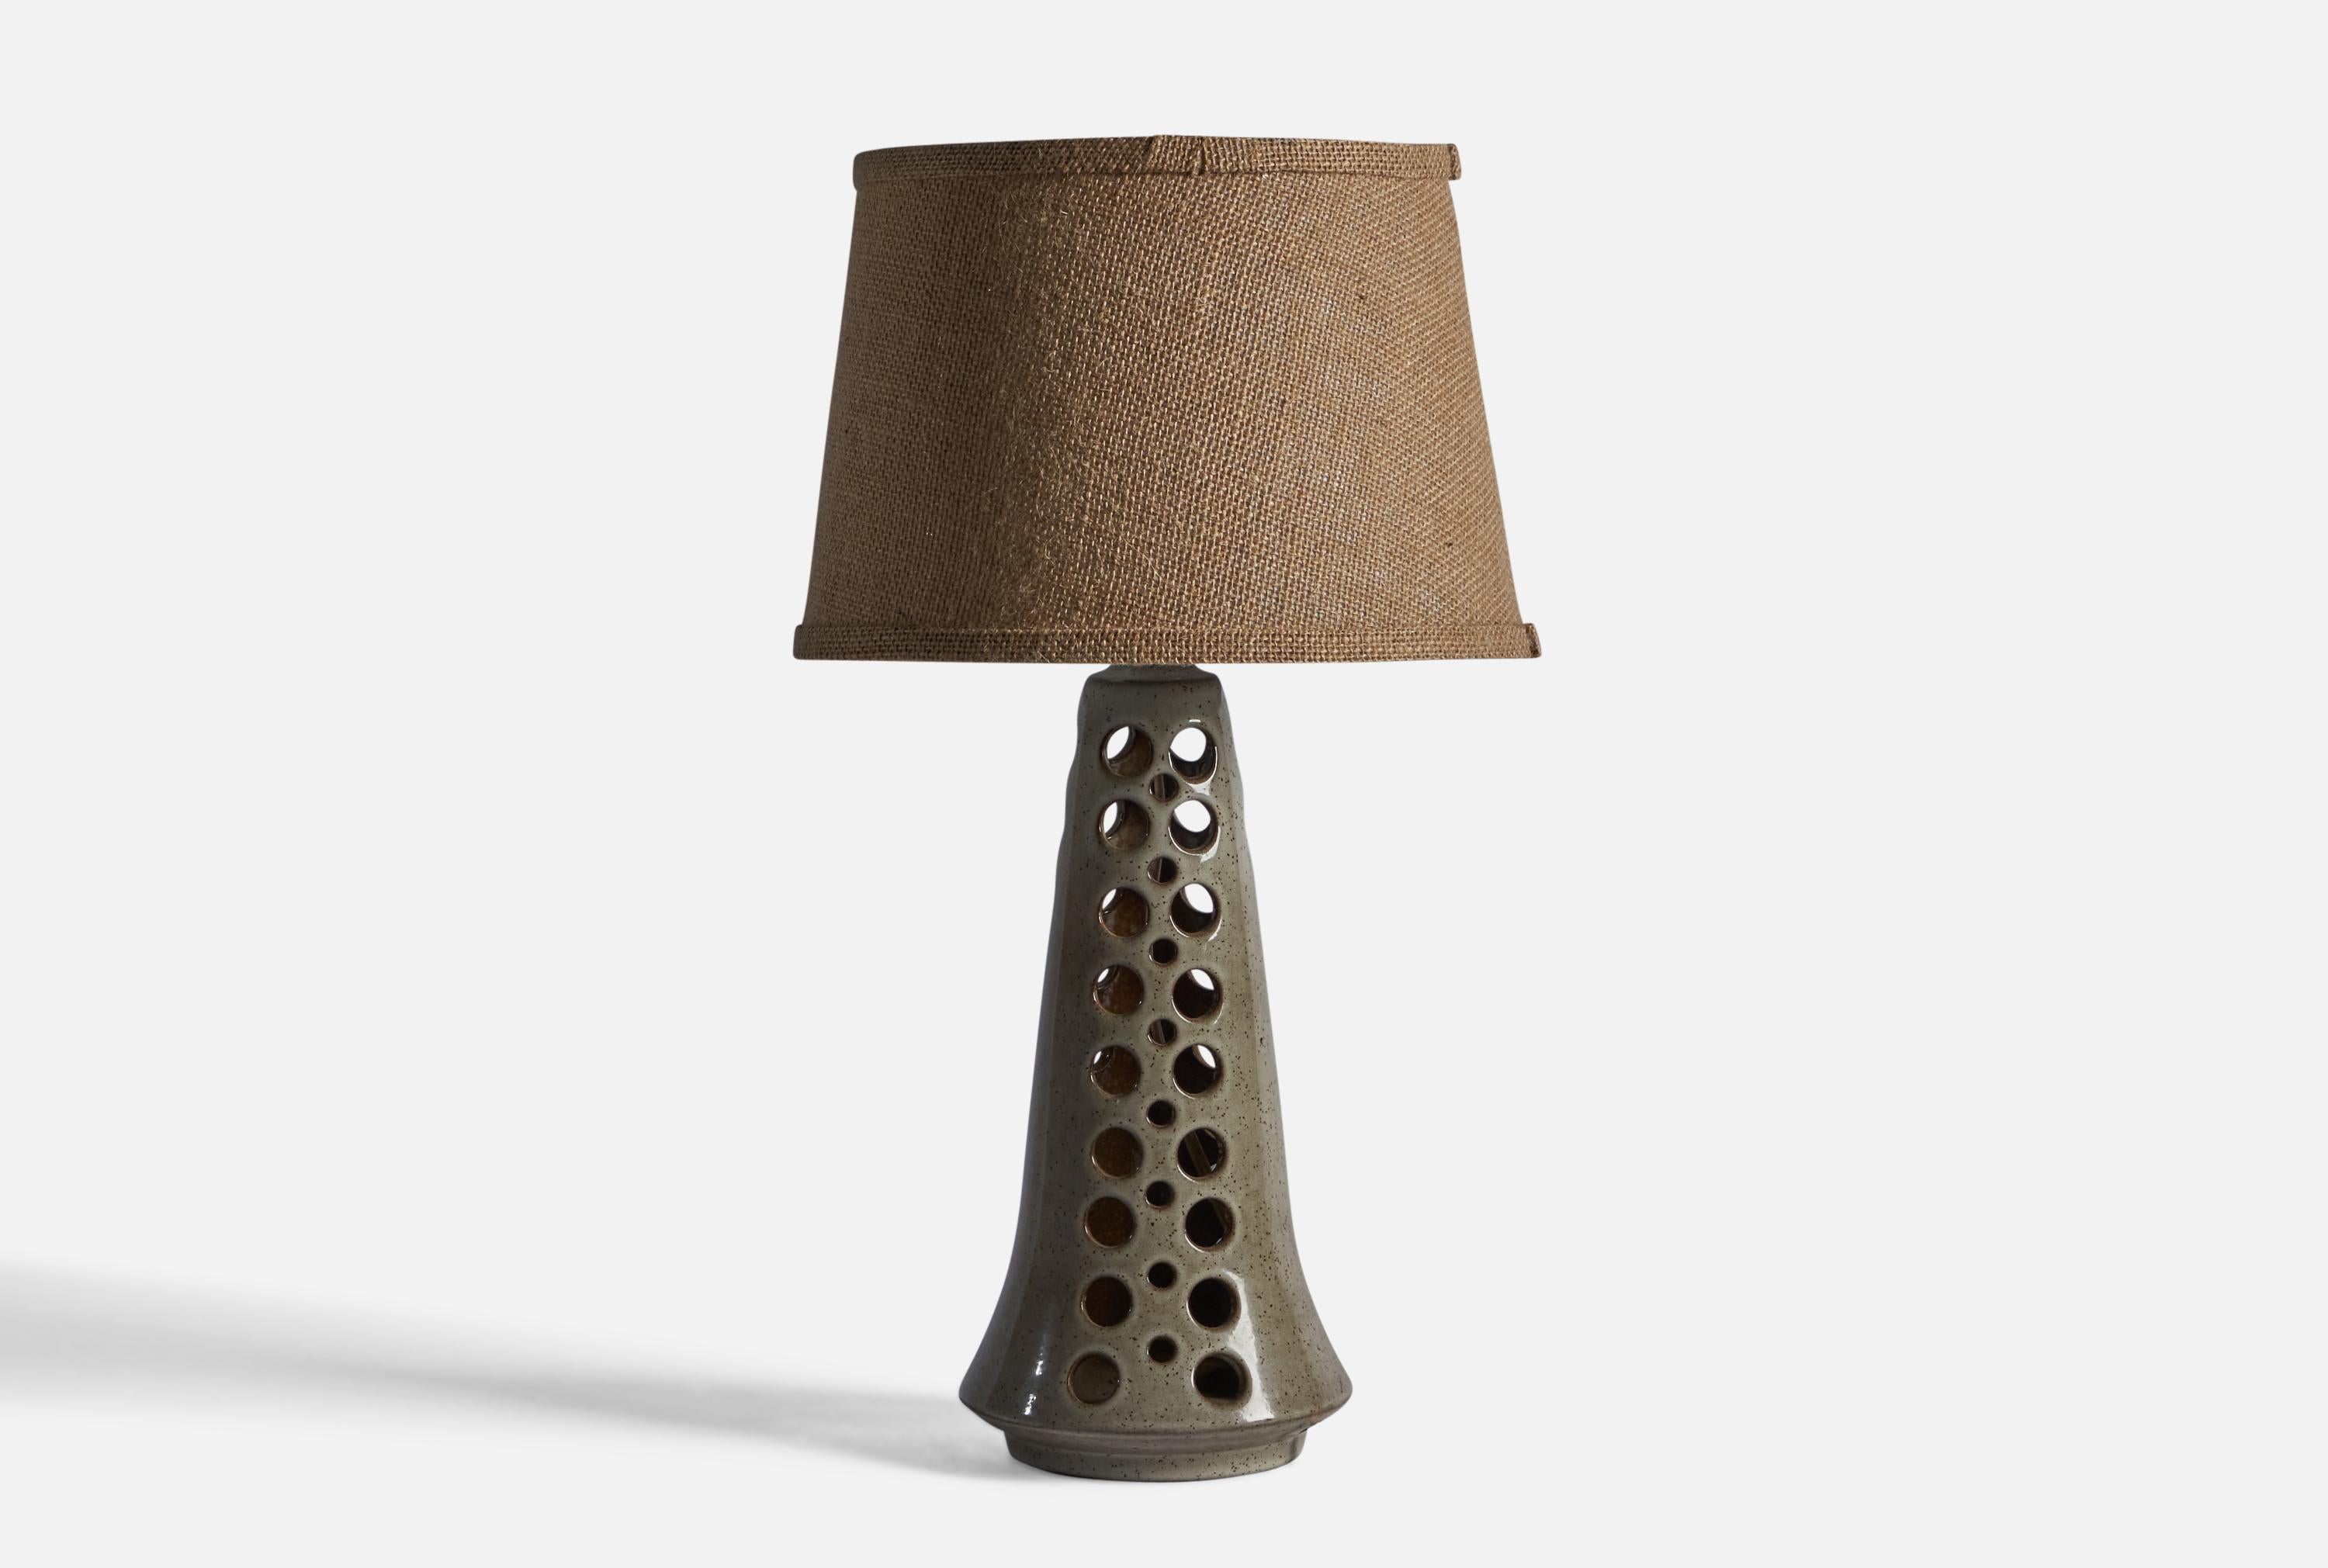 A grey-glazed perforated stoneware table lamp, designed and produced by Michael Andersen, Bornholm, Denmark, c. 1960s.

Dimensions of Lamp (inches): 14.75